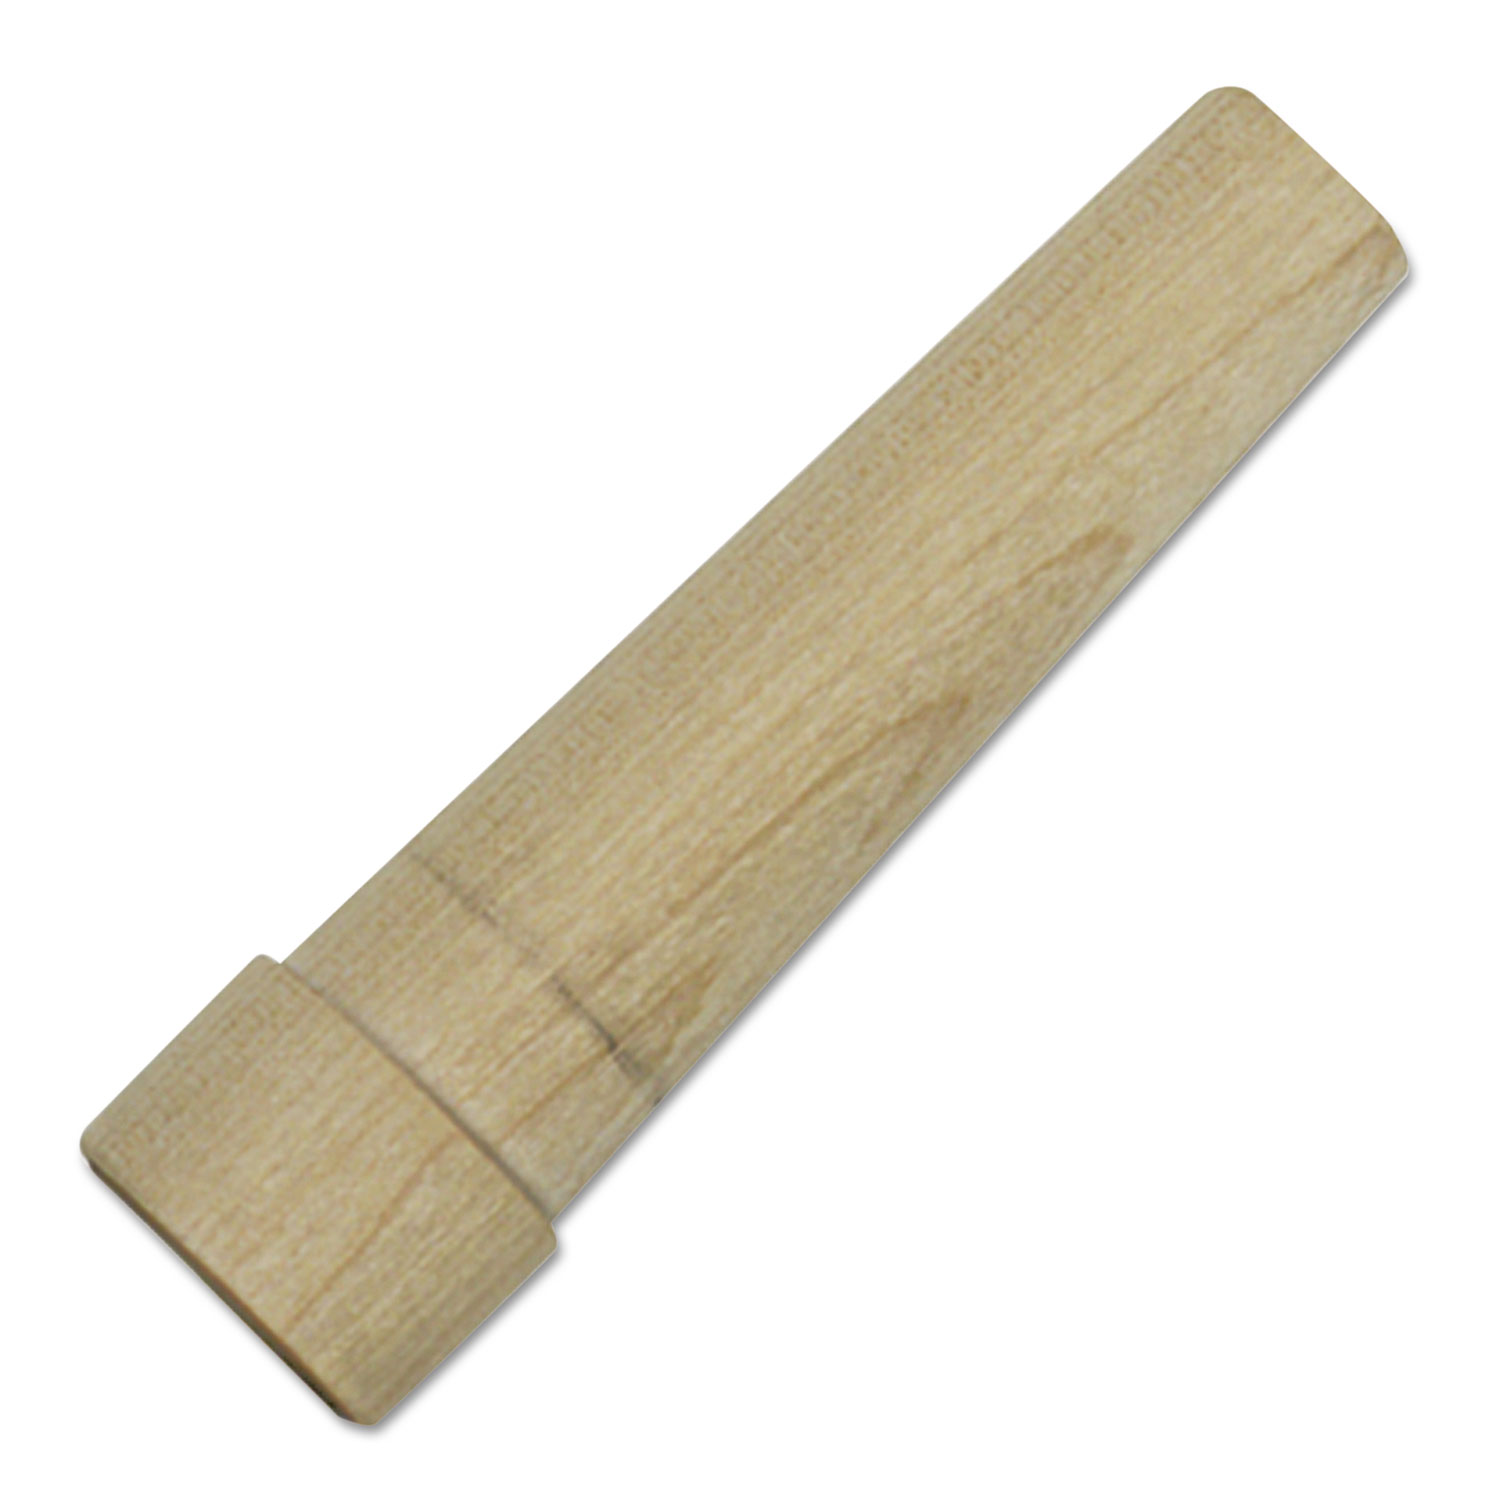  Unger TWA00 Threaded Wood-Cone Adapter (UNGTWA0) 